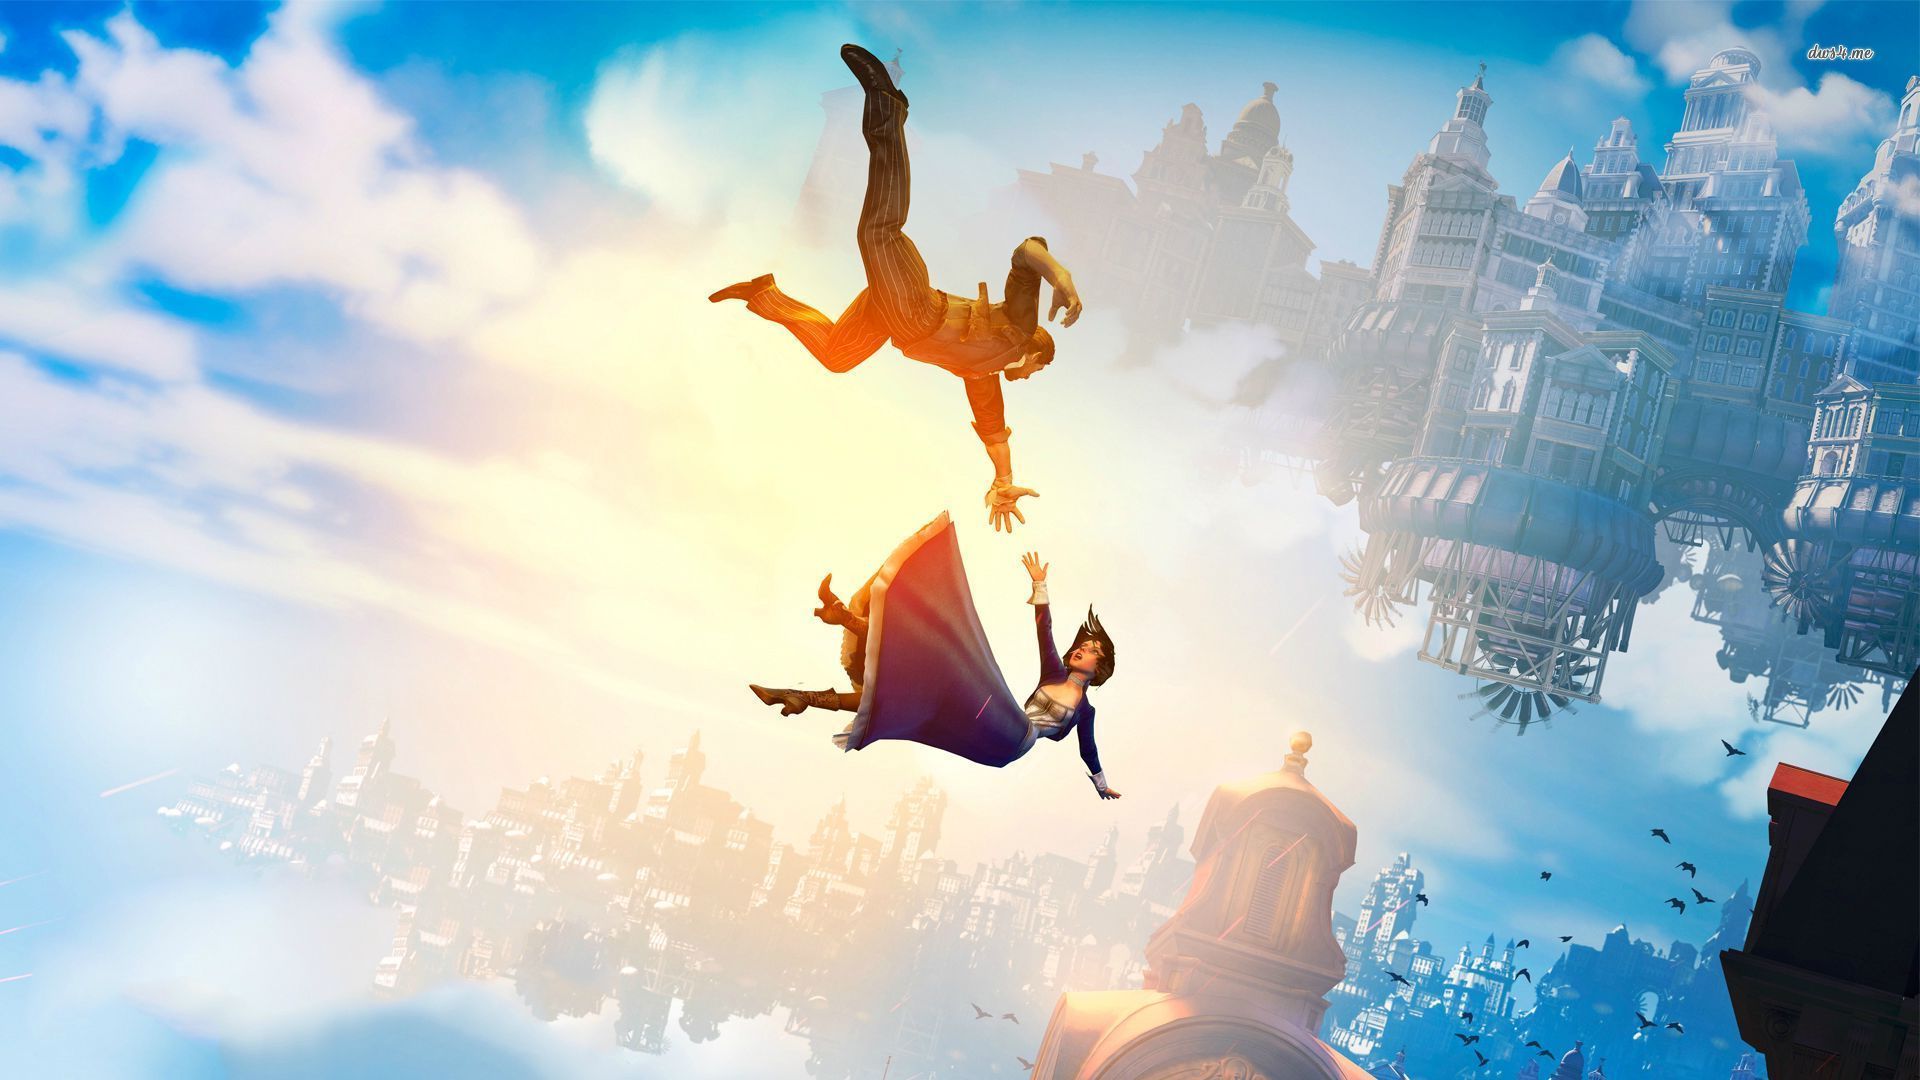 android bioshock infinite images